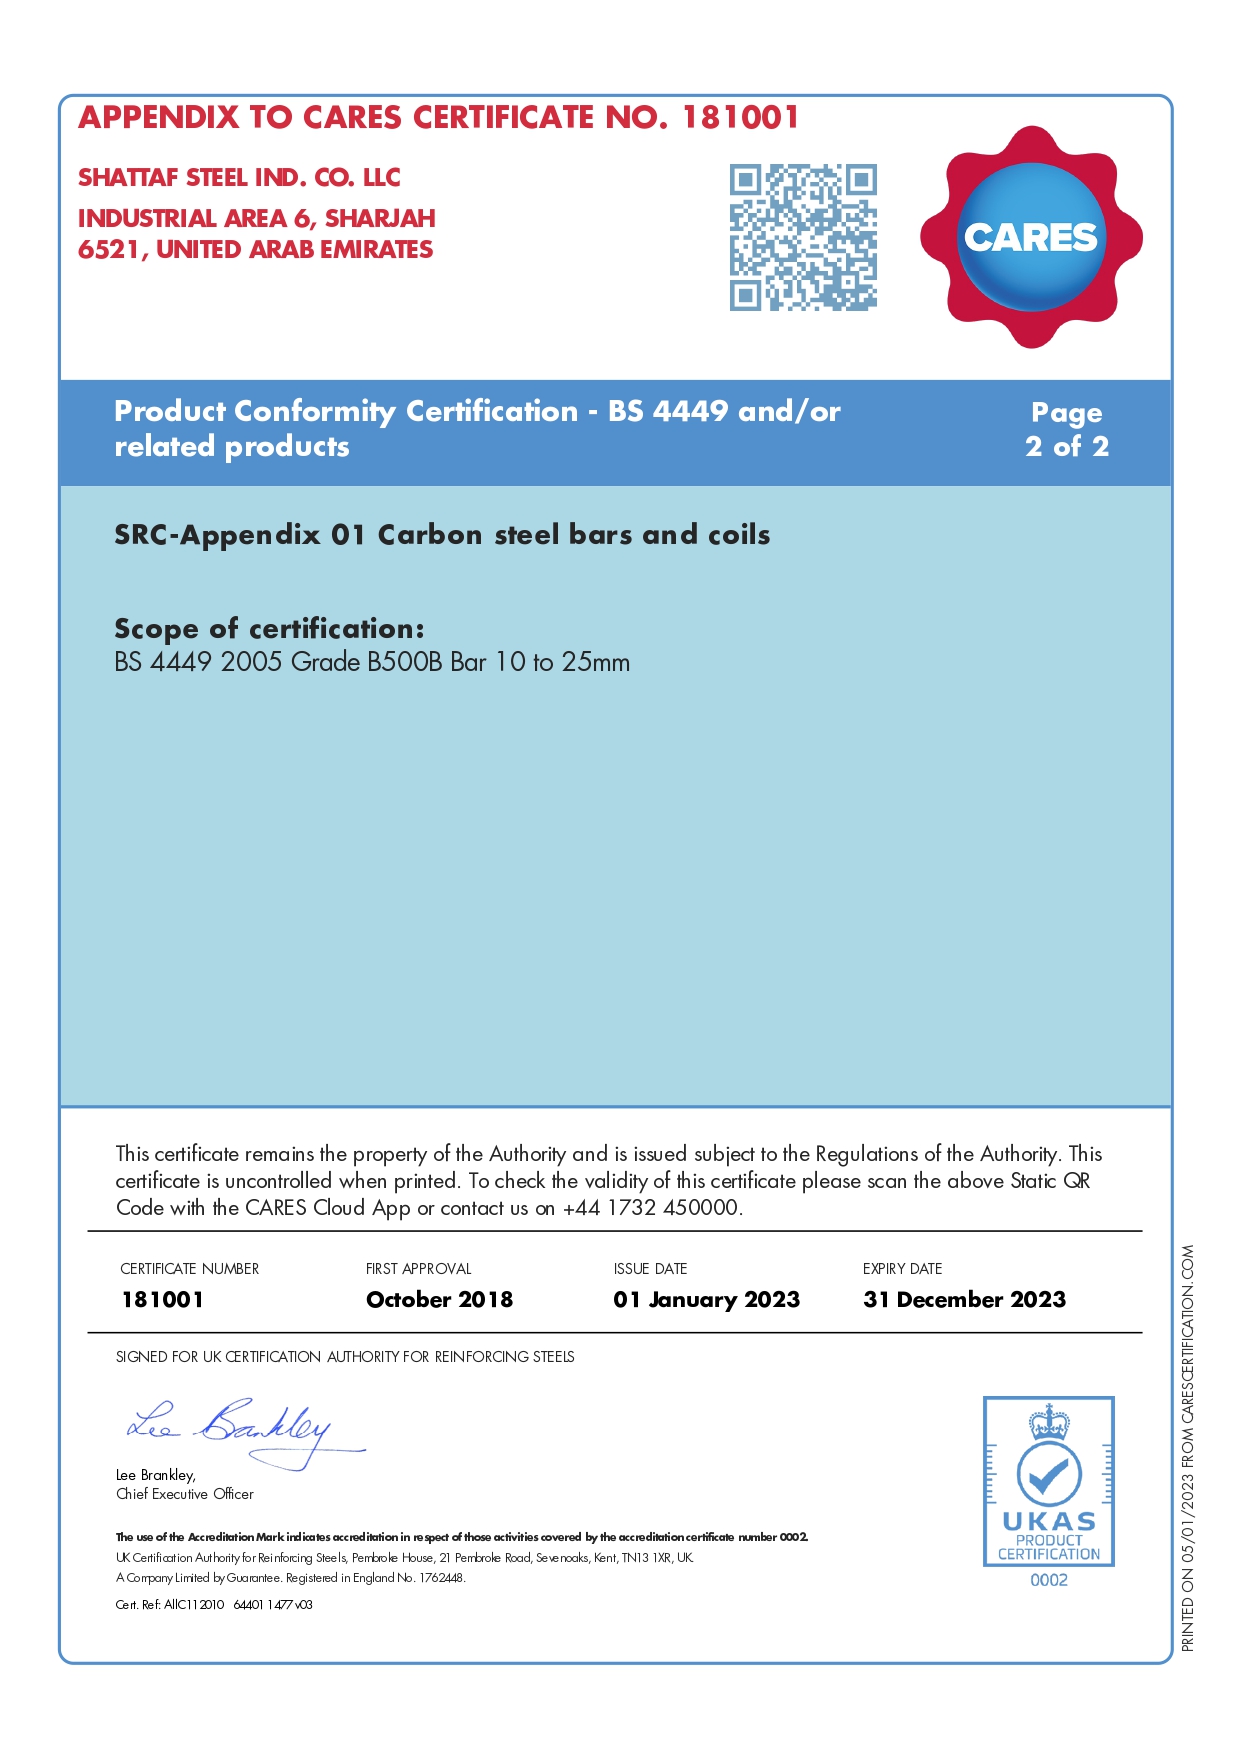 UK Cares – Product Conformity Certificate